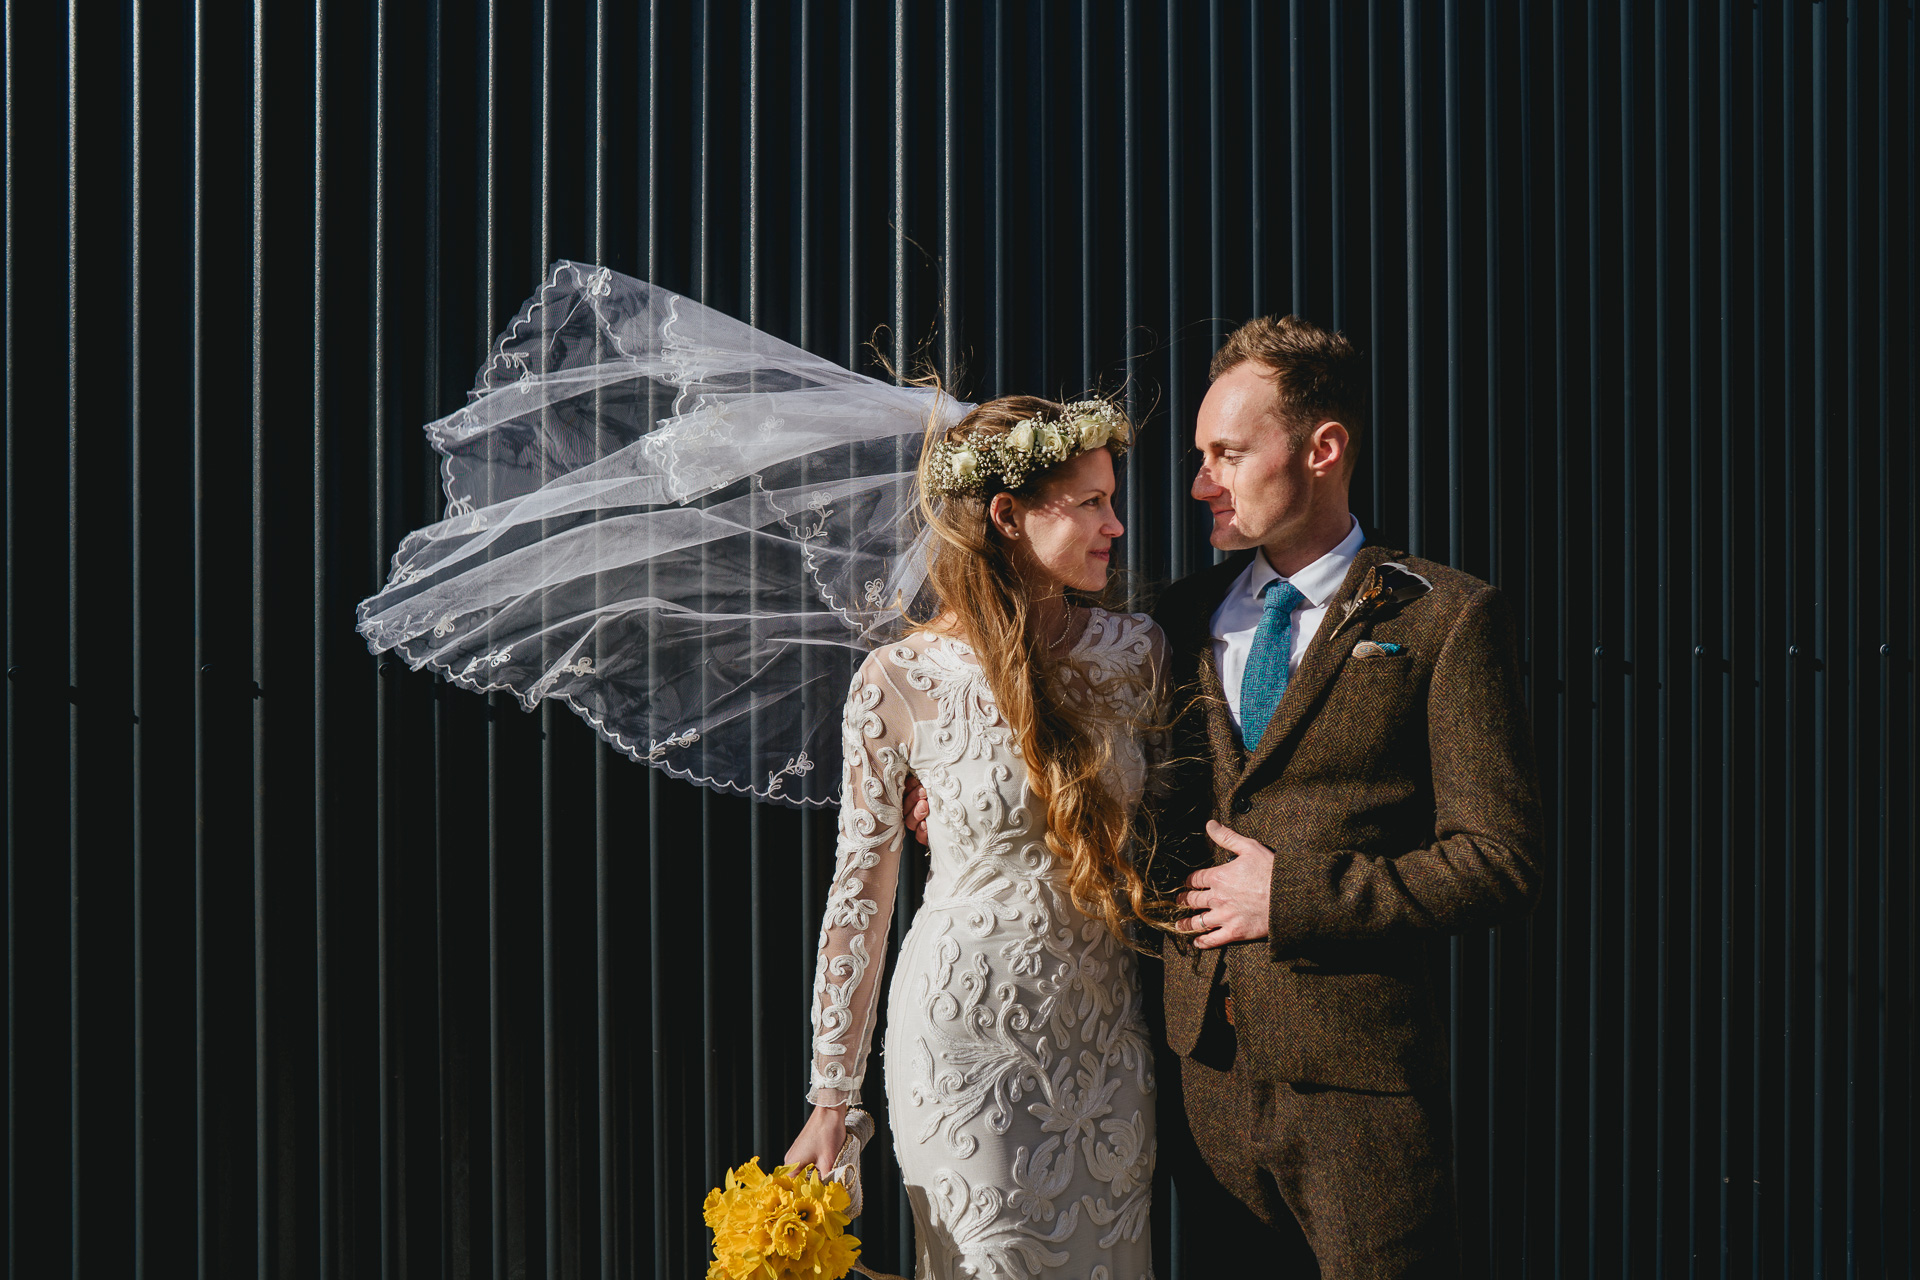 A bride and groom standing in front of a corrugated shed, with the bride's veil blowing in the wind